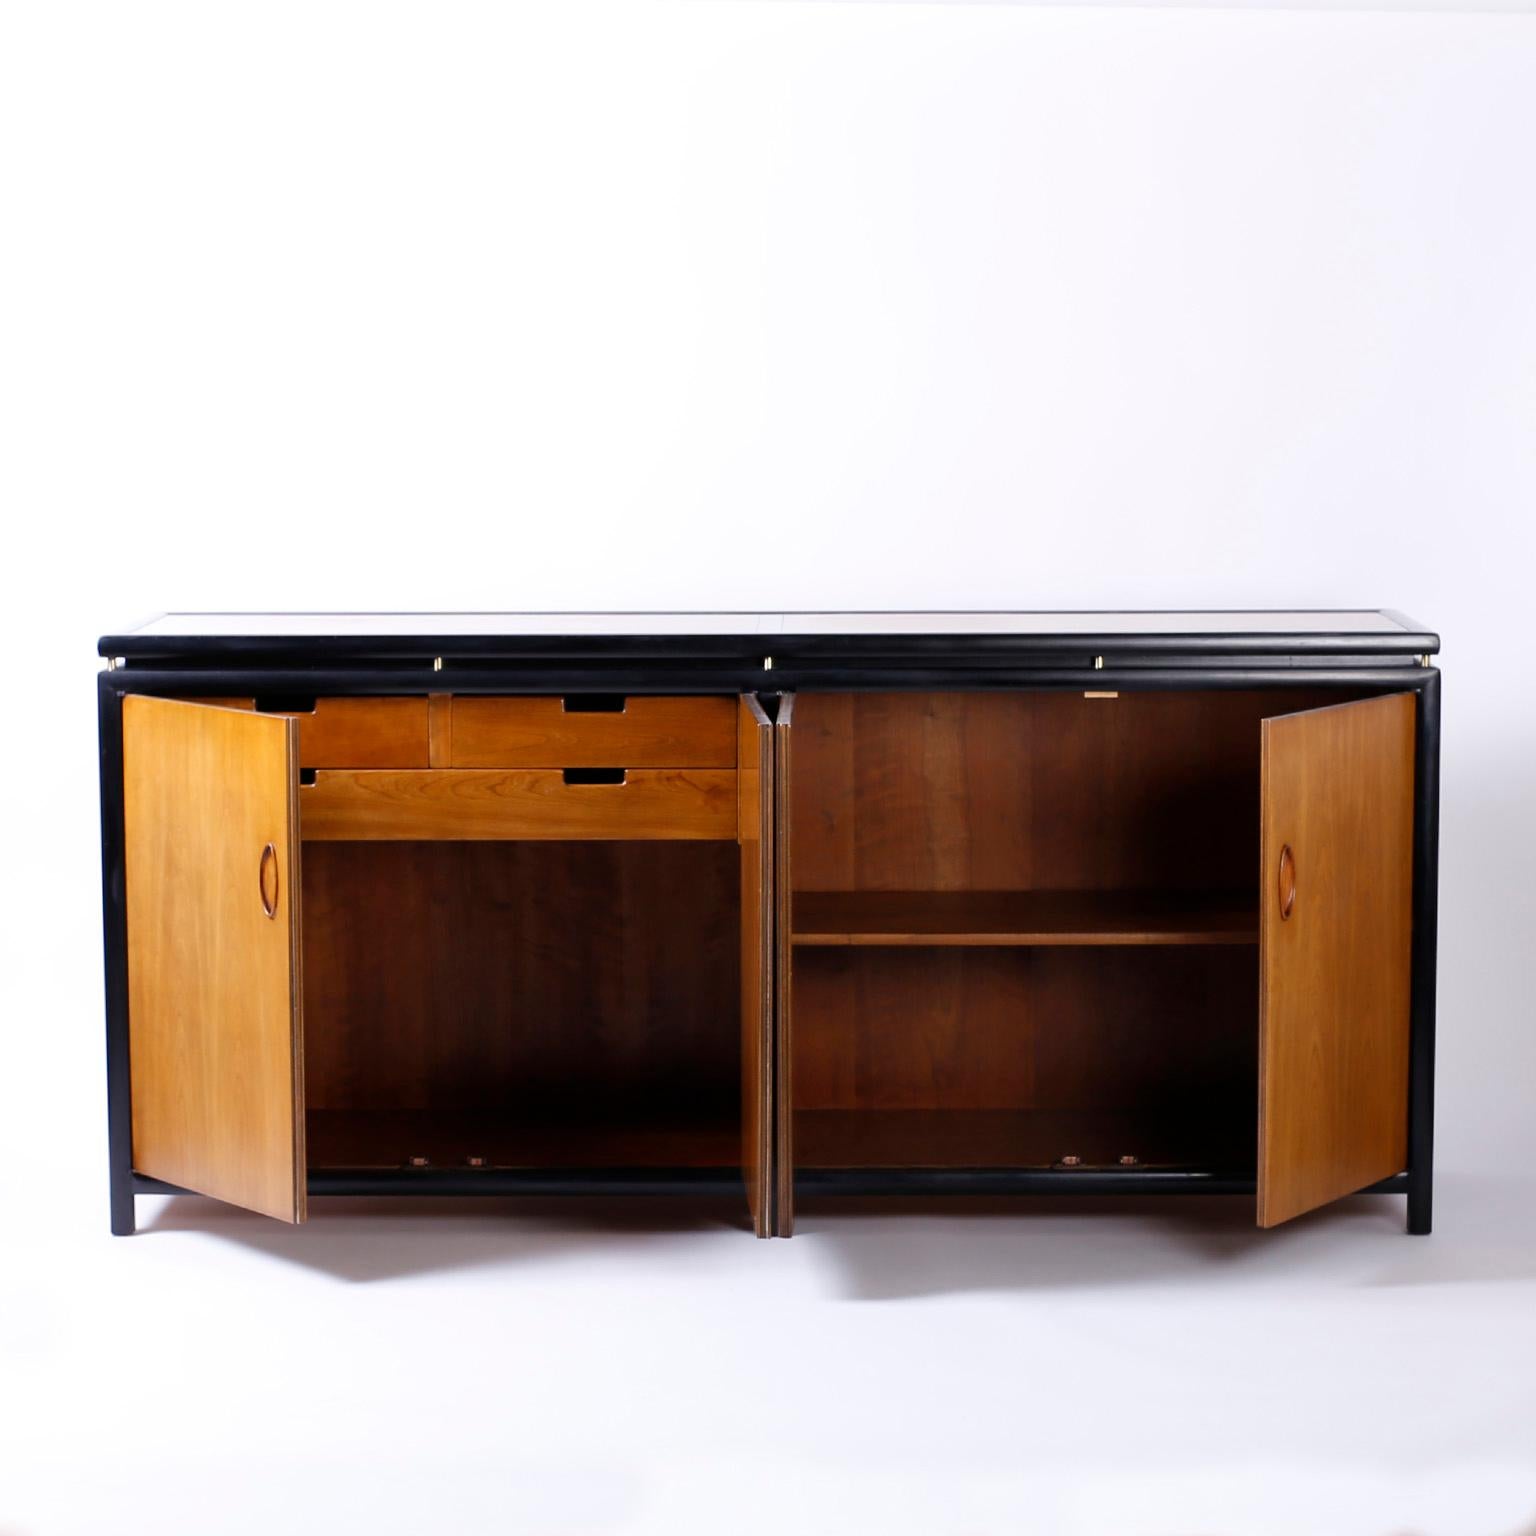 Sleek modern four door cabinet with an ebonized frame and walnut top, sides and front, Featuring chic inset handles and plenty of storage with signed Baker in a drawer.